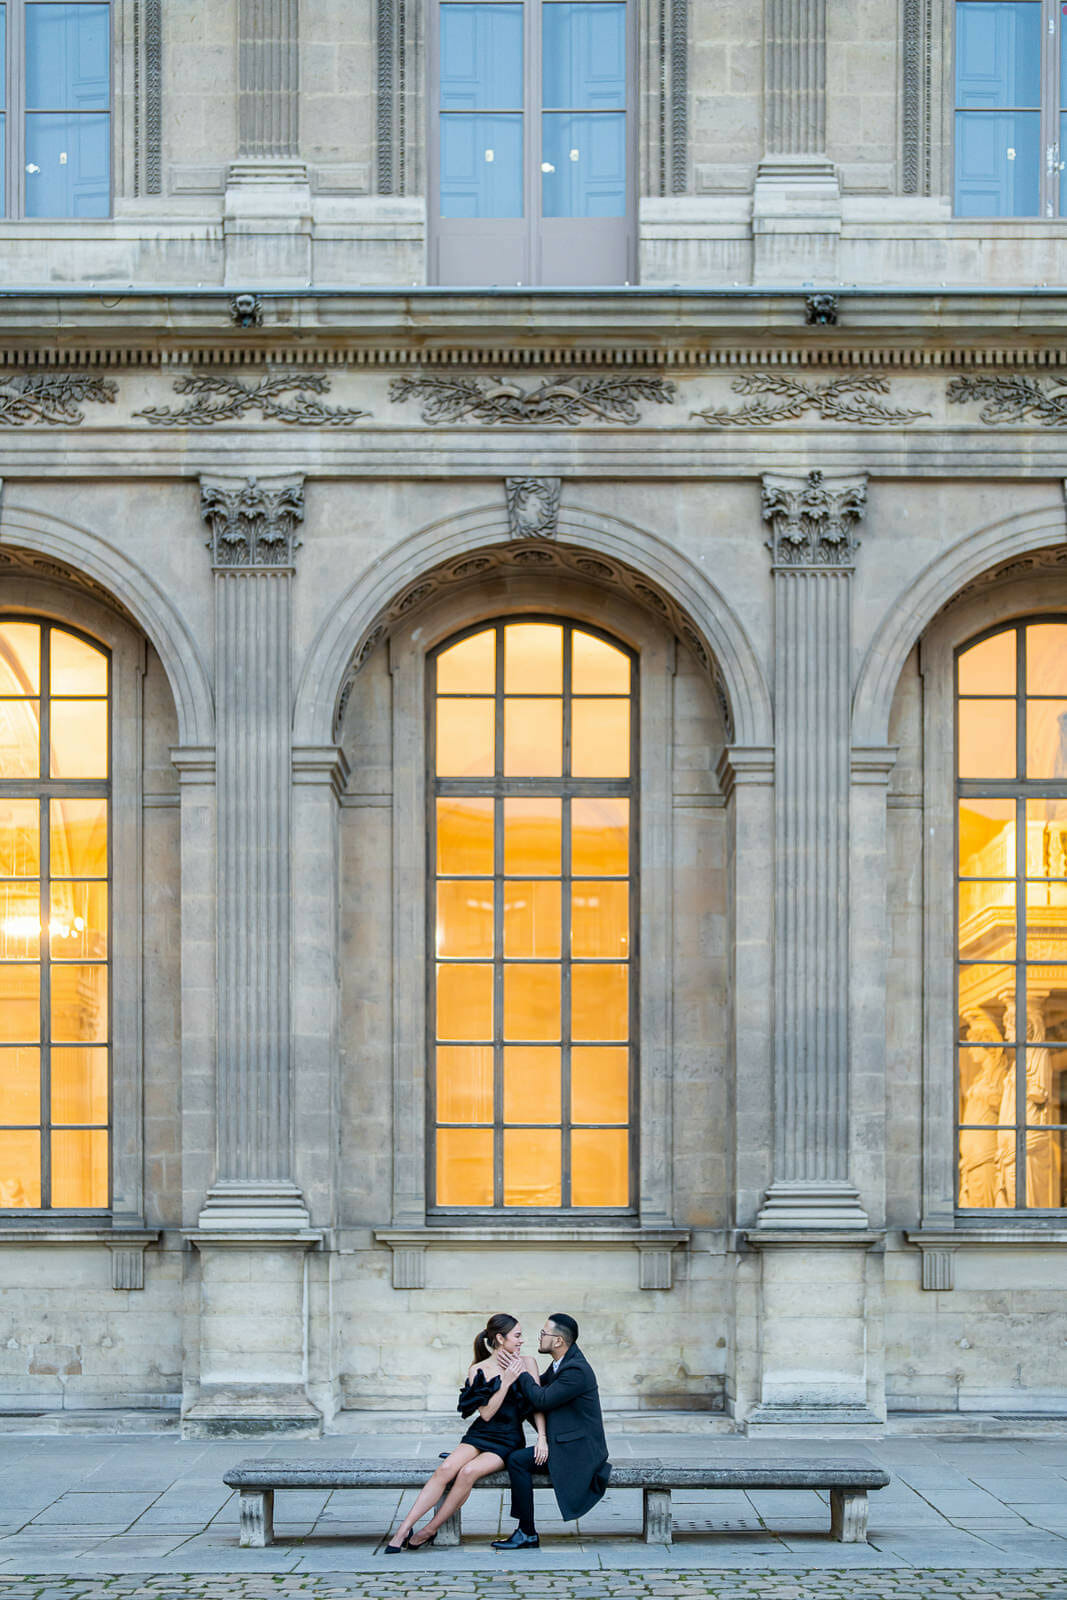 Romantic Paris couple photoshoot at the Louvre Museum in the evening